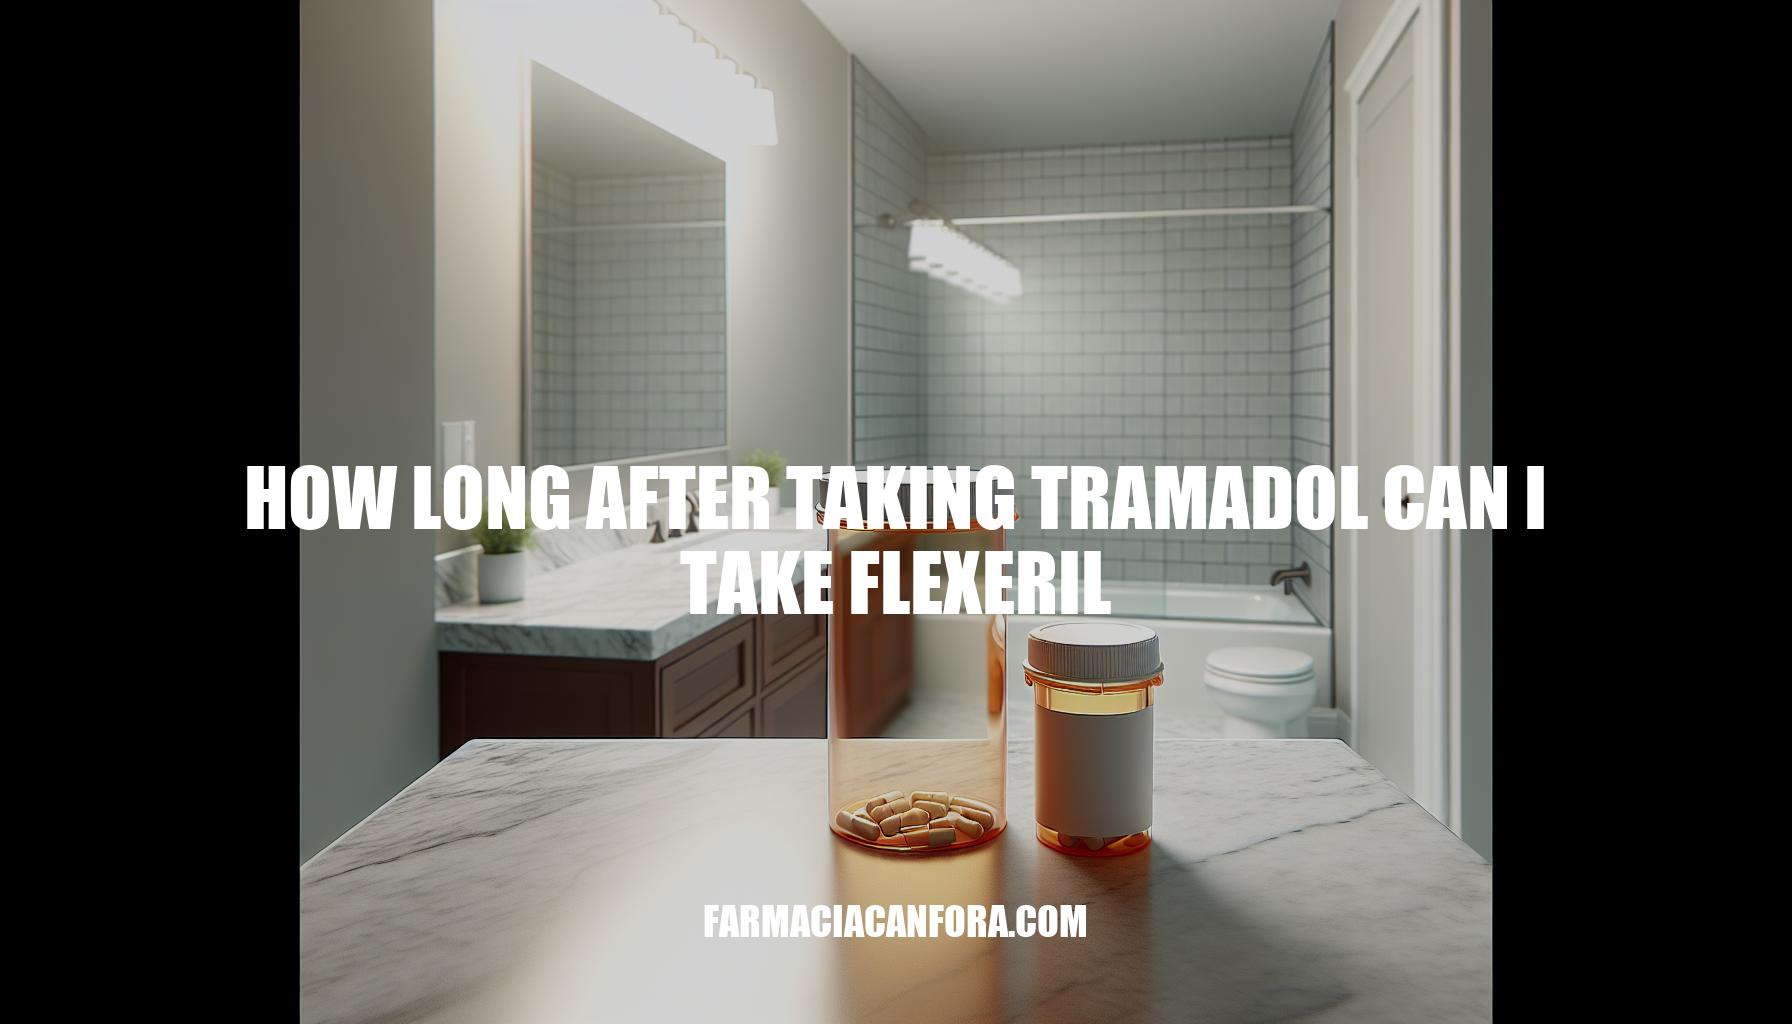 How Long After Taking Tramadol Can I Take Flexeril